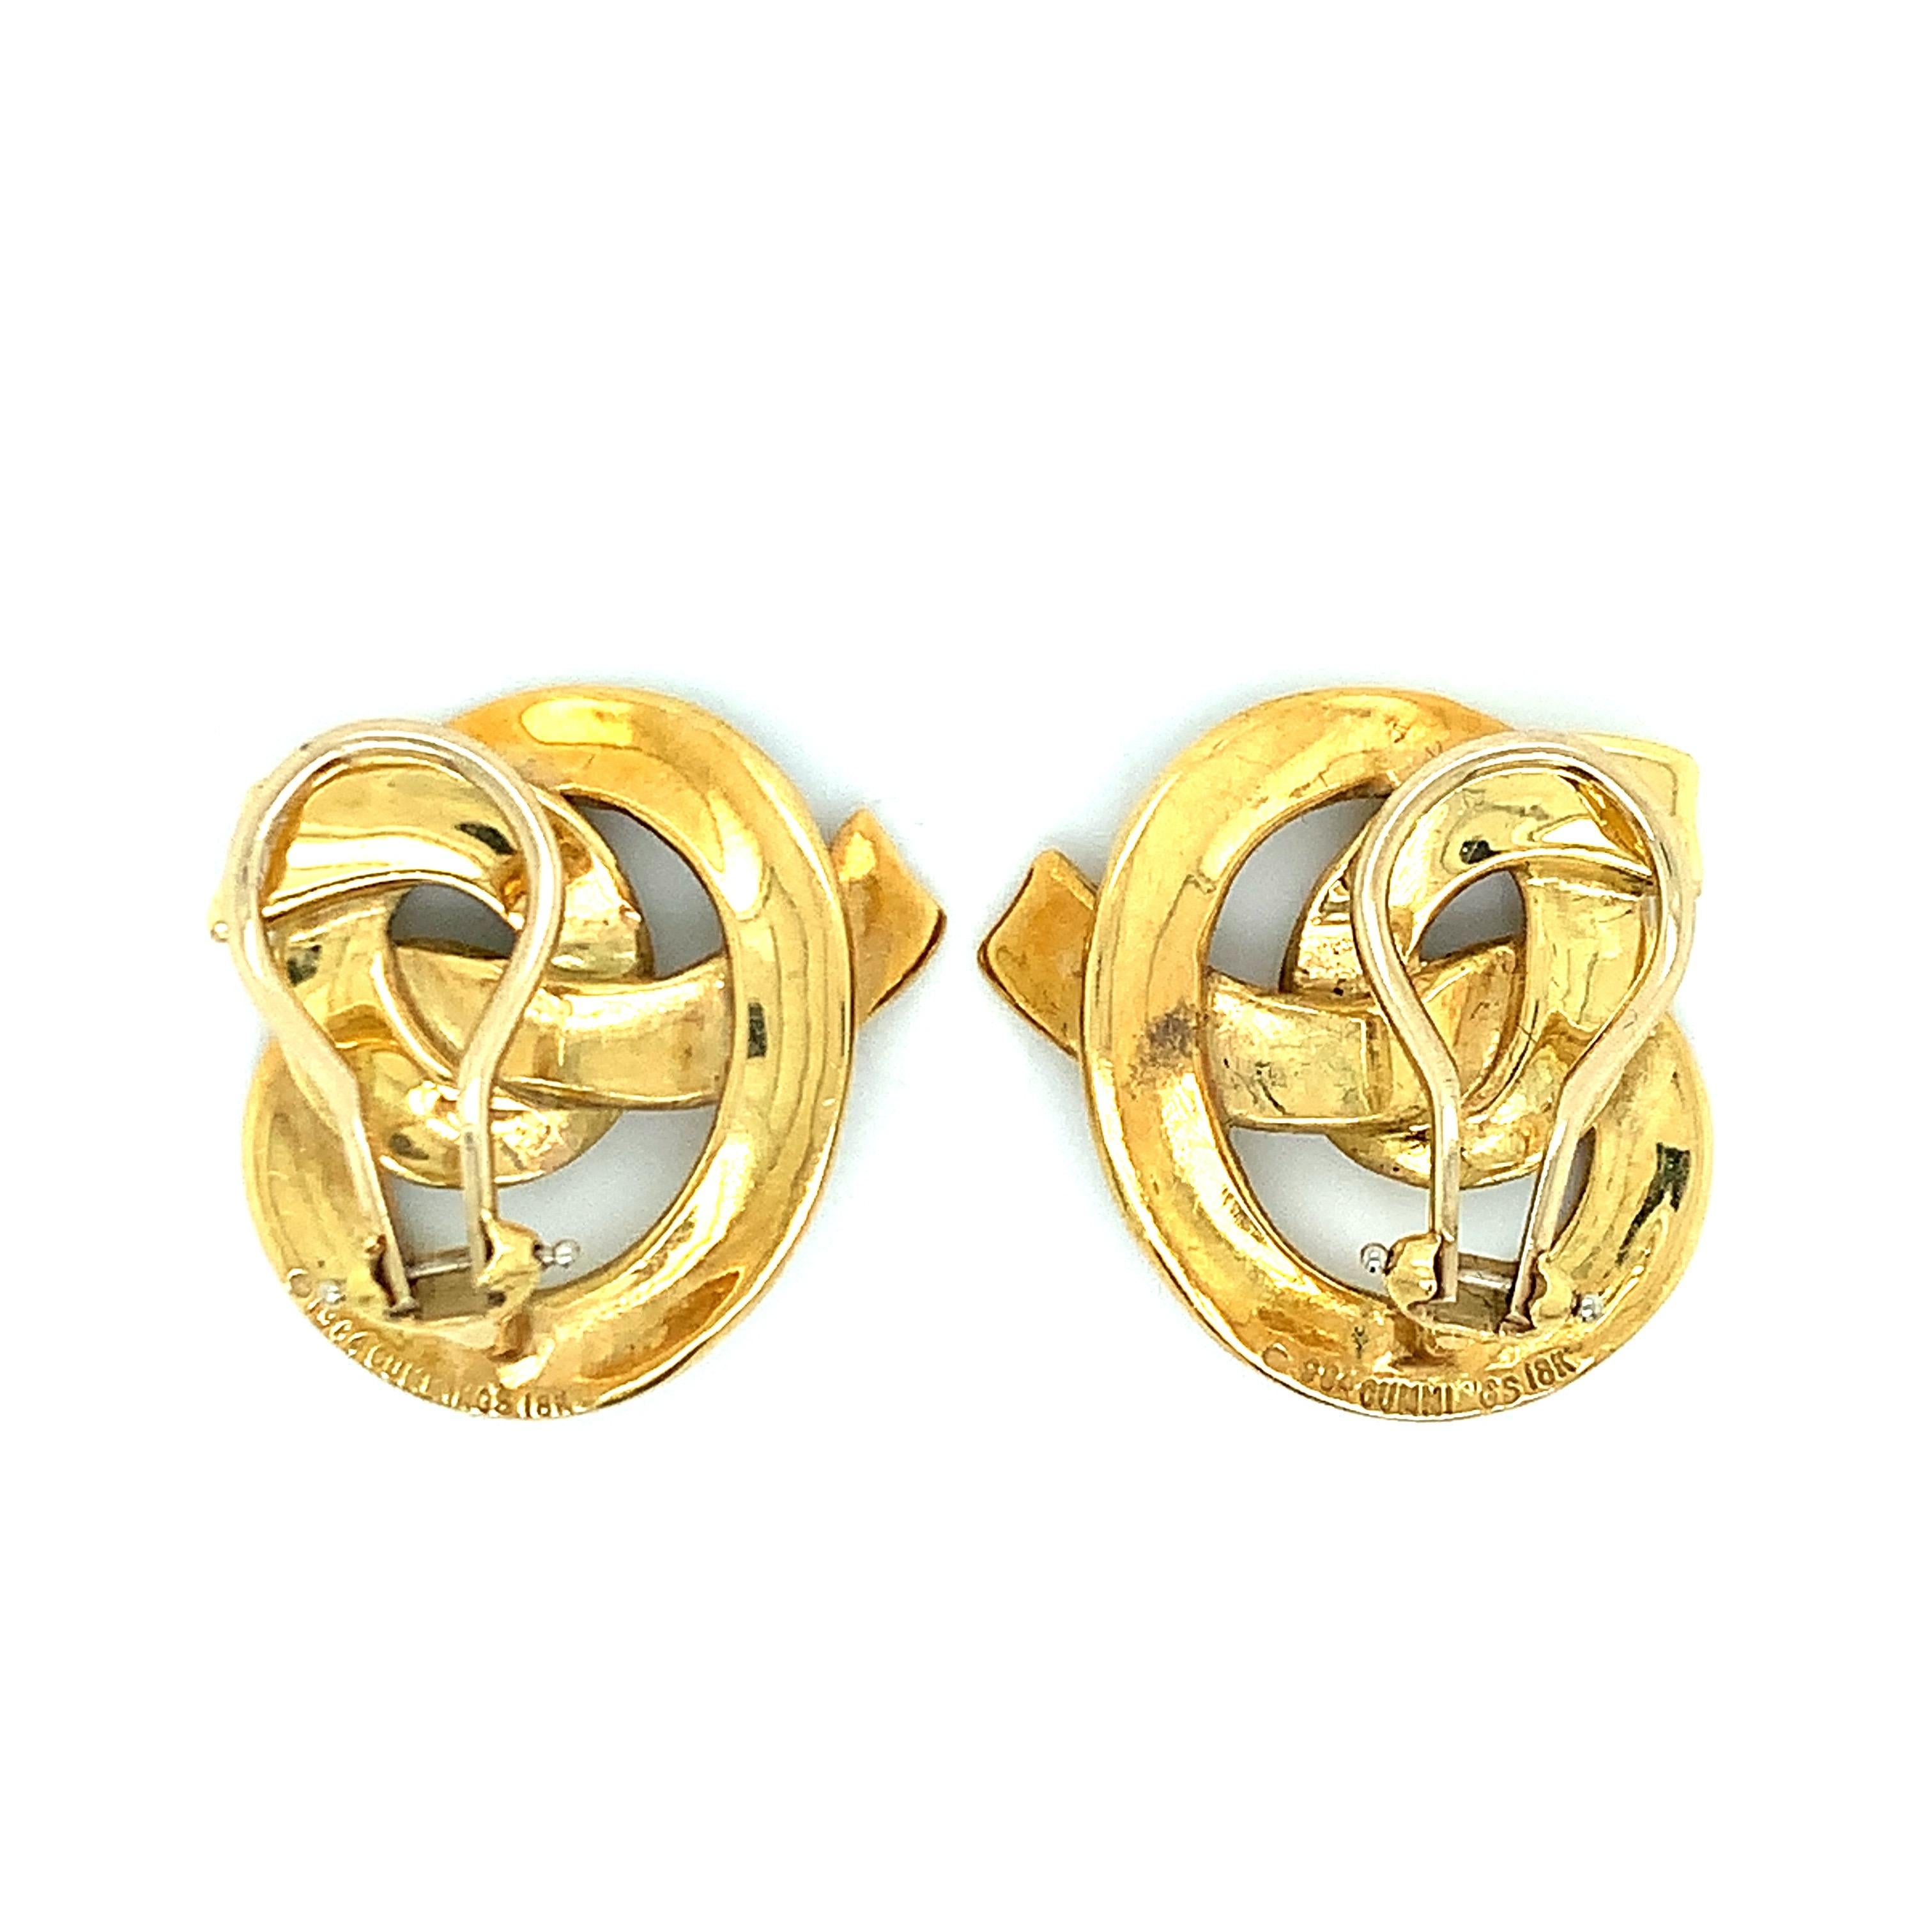 Angela Cummings for Tiffany & Co. 18 karat yellow gold ear clips that feature a swirl motif. Marked: 1984 / Cummings / 18K. Total weight: 15.9 grams. Width: 2.4 cm. Length: 2.3 cm. 